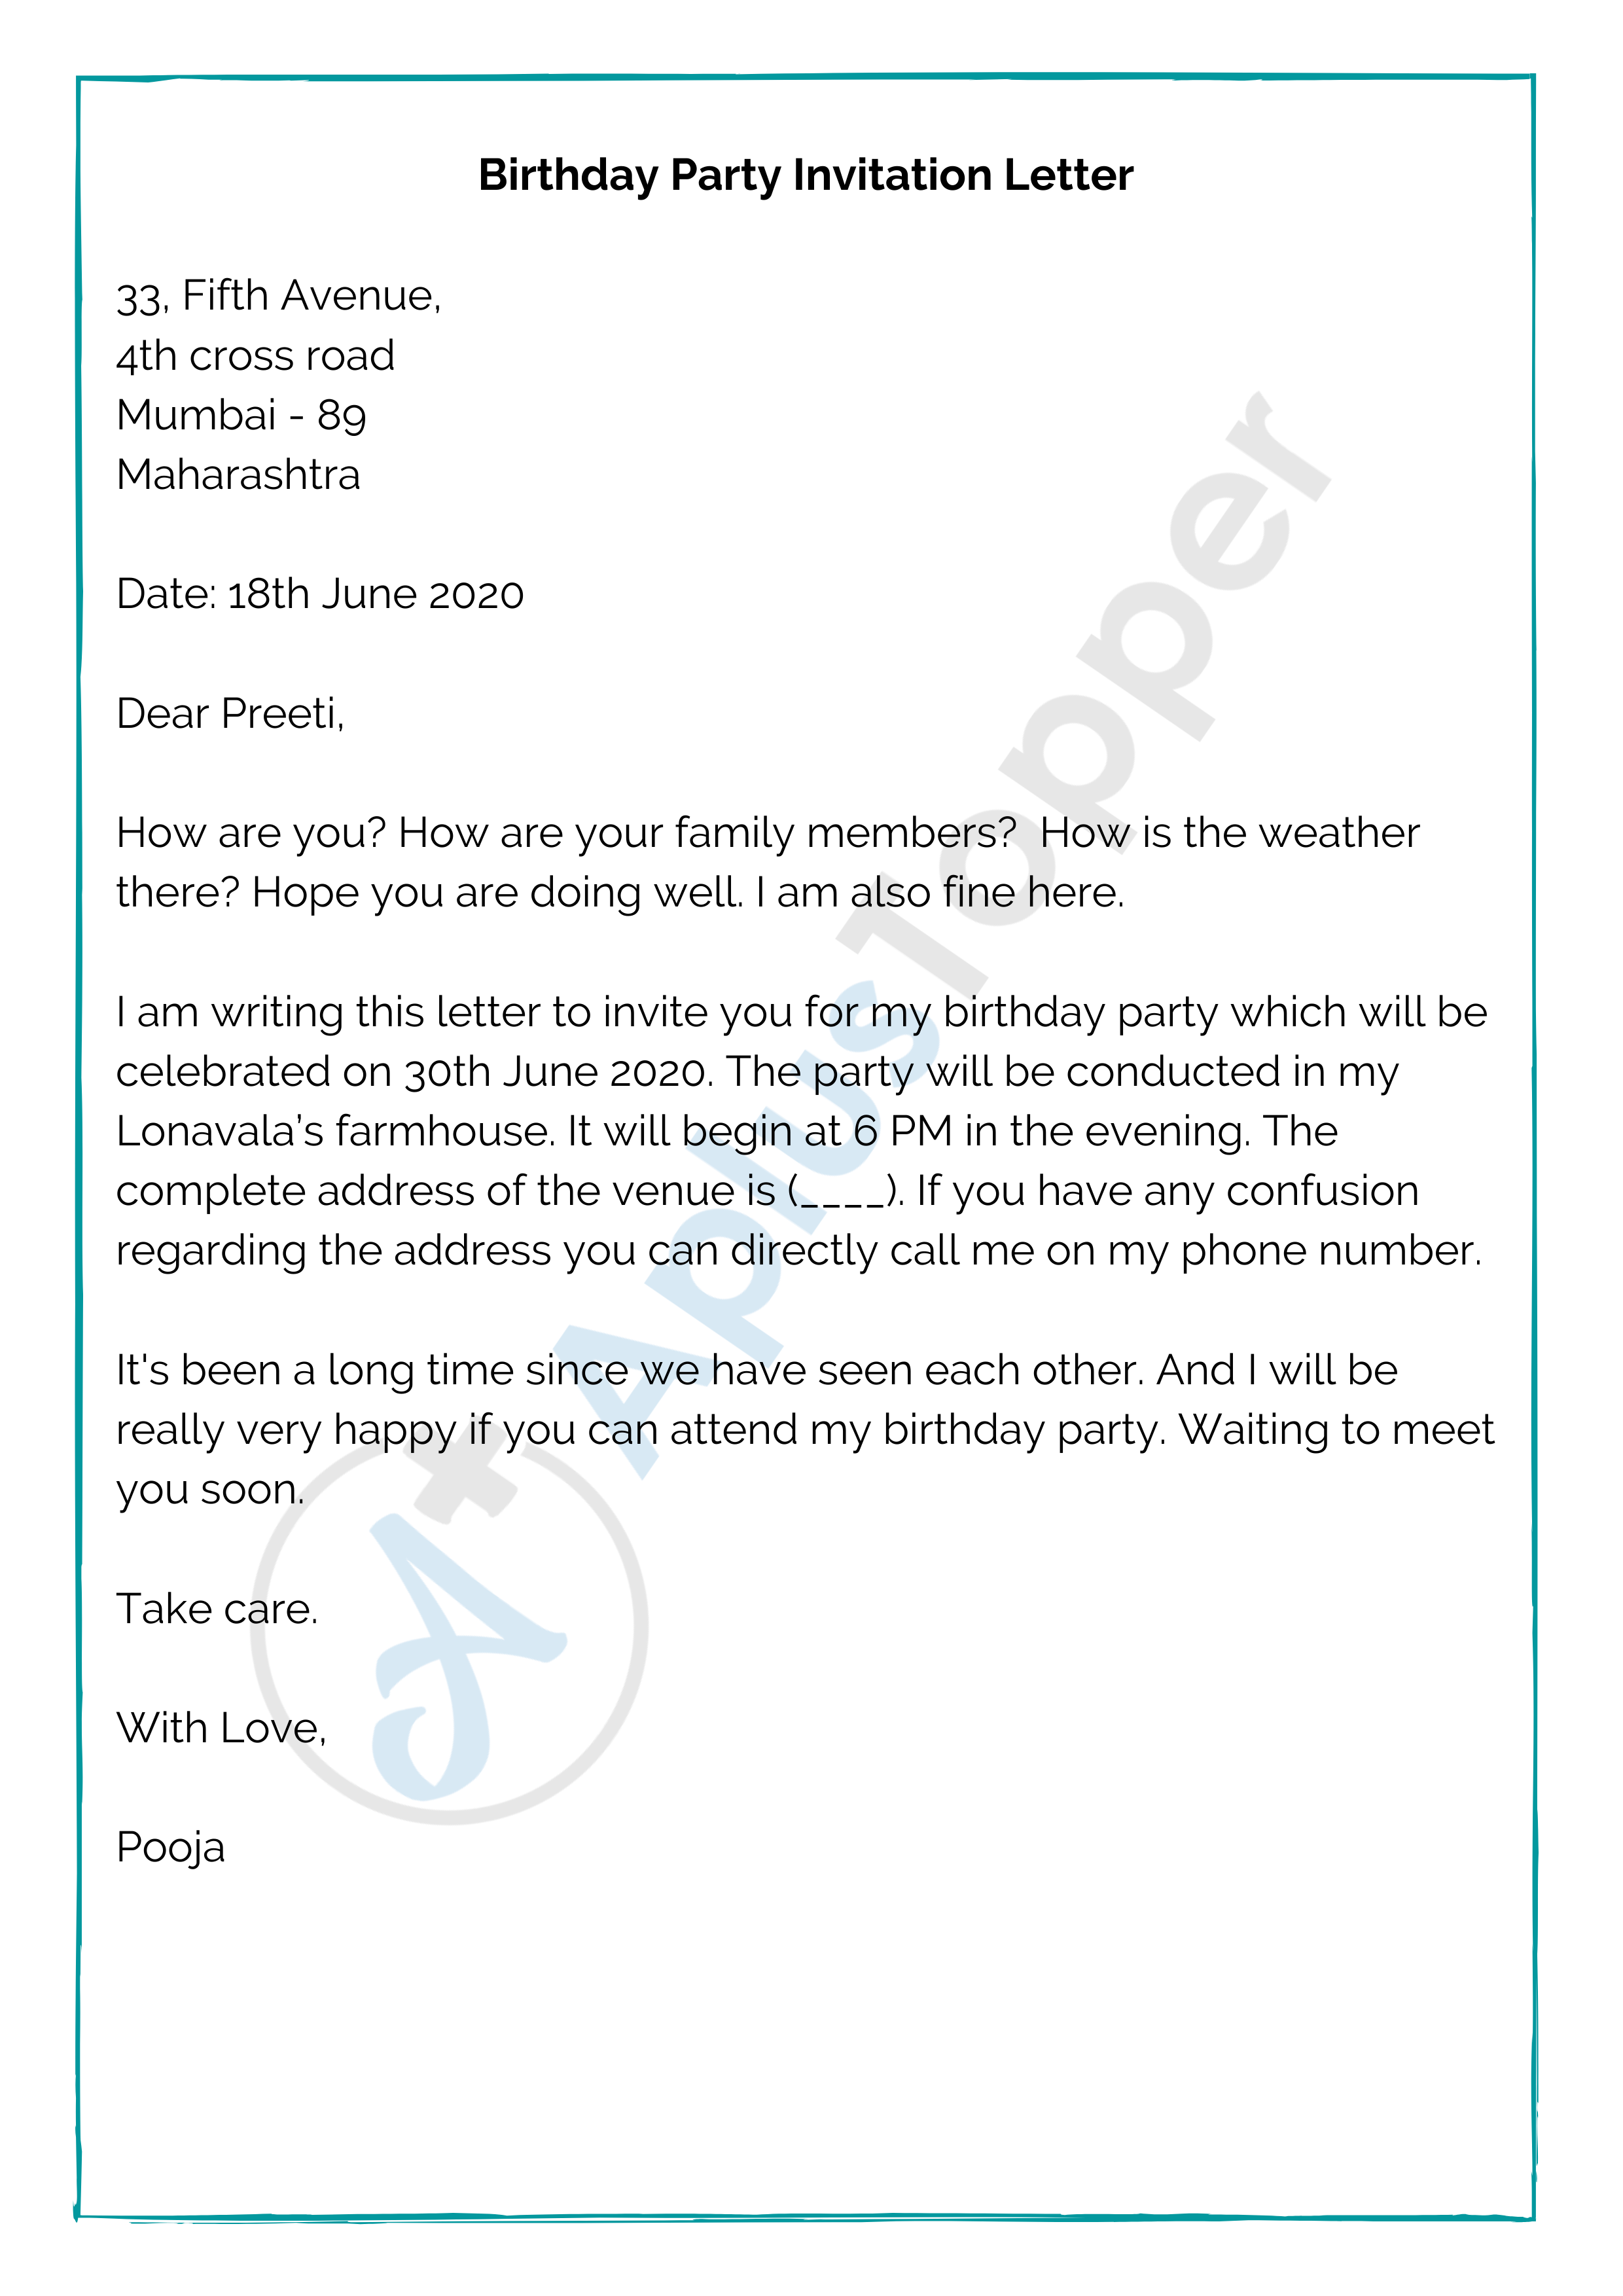 Informal Letter | Informal Letter Format, Examples and How To Write an